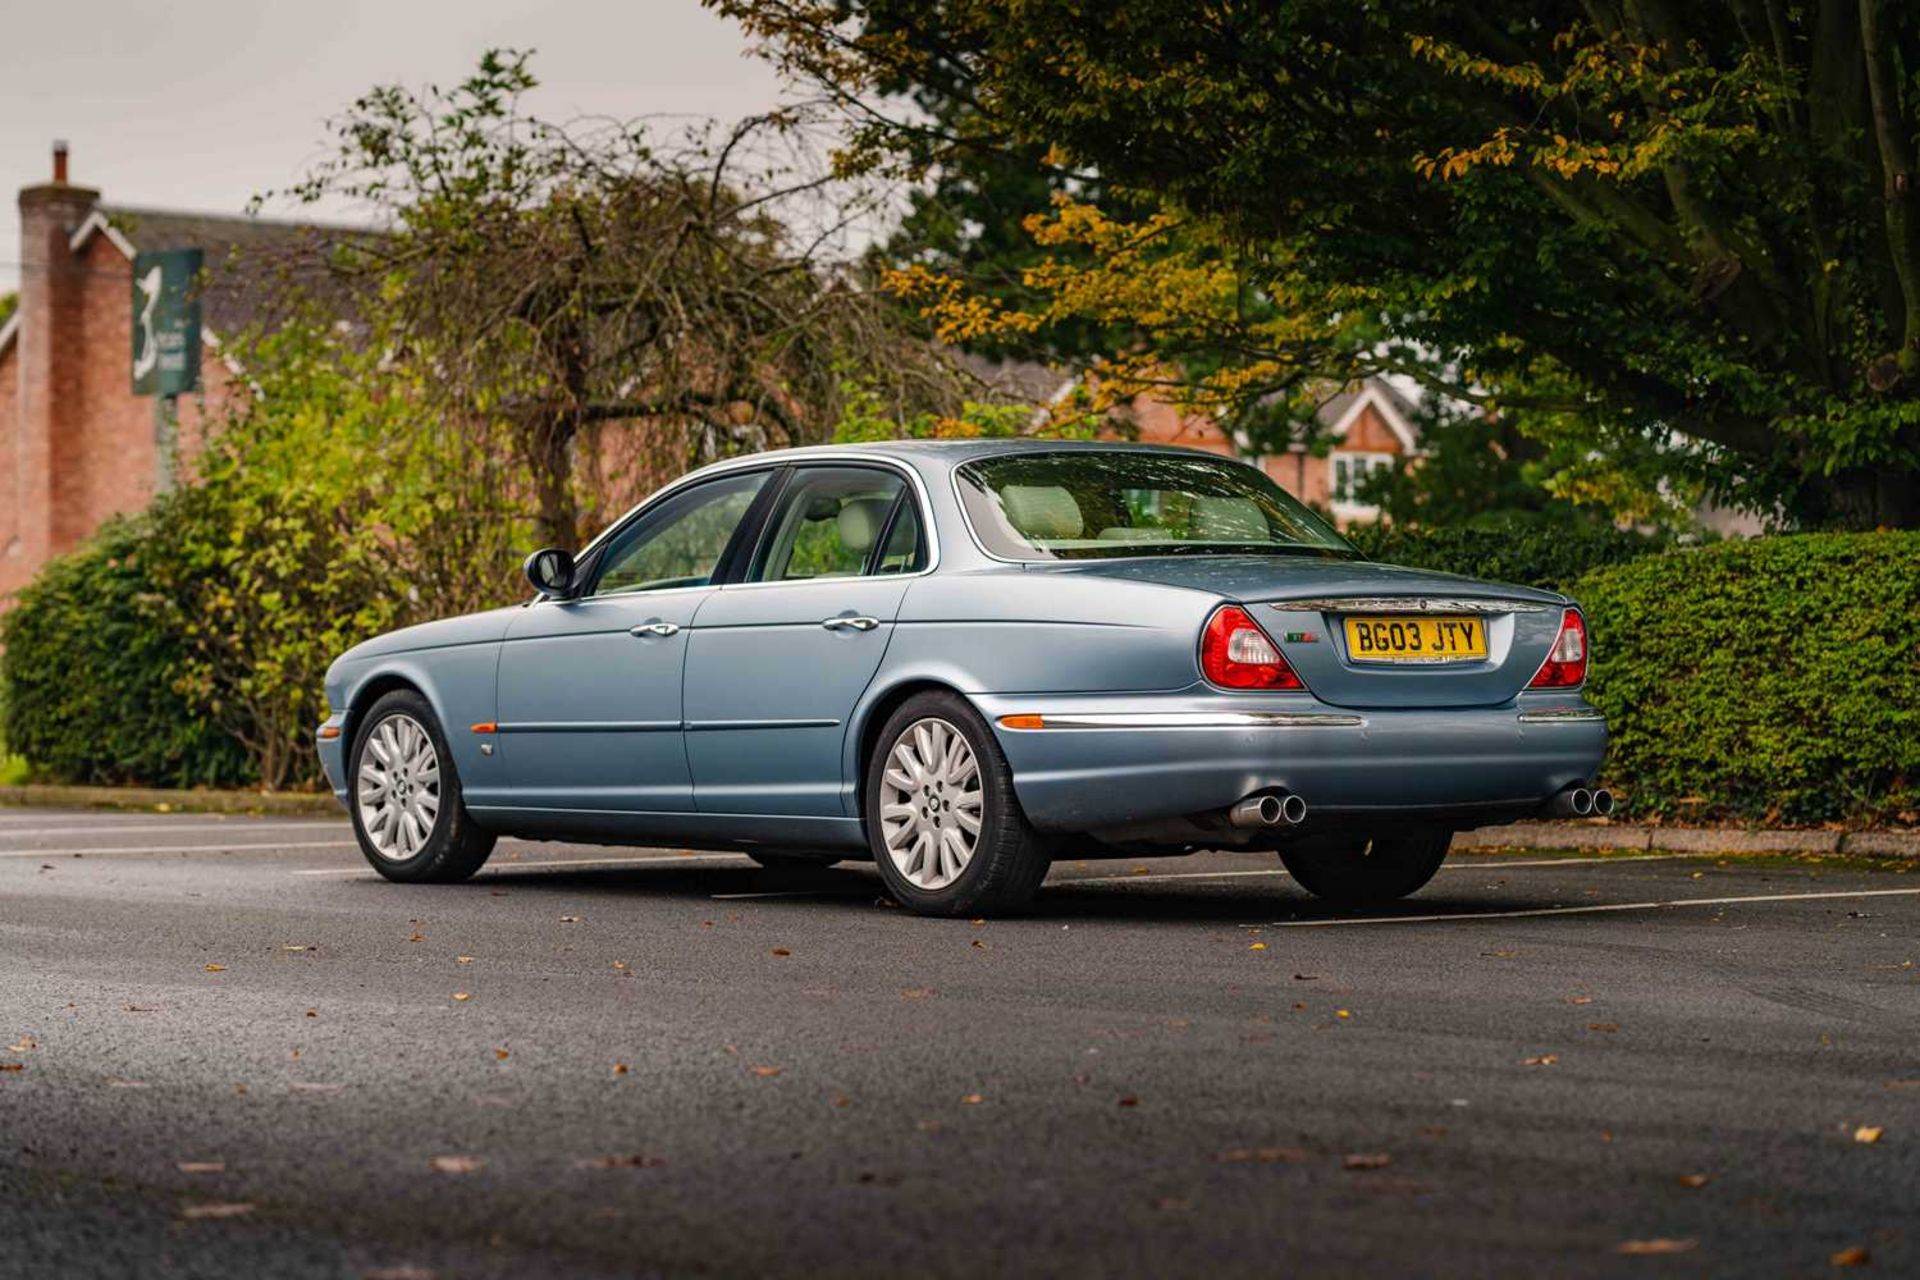 2003 Jaguar XJ8 4.2 V8 SE Range-topping 'Special Equipment' model, with a current MOT and warranted  - Image 7 of 124